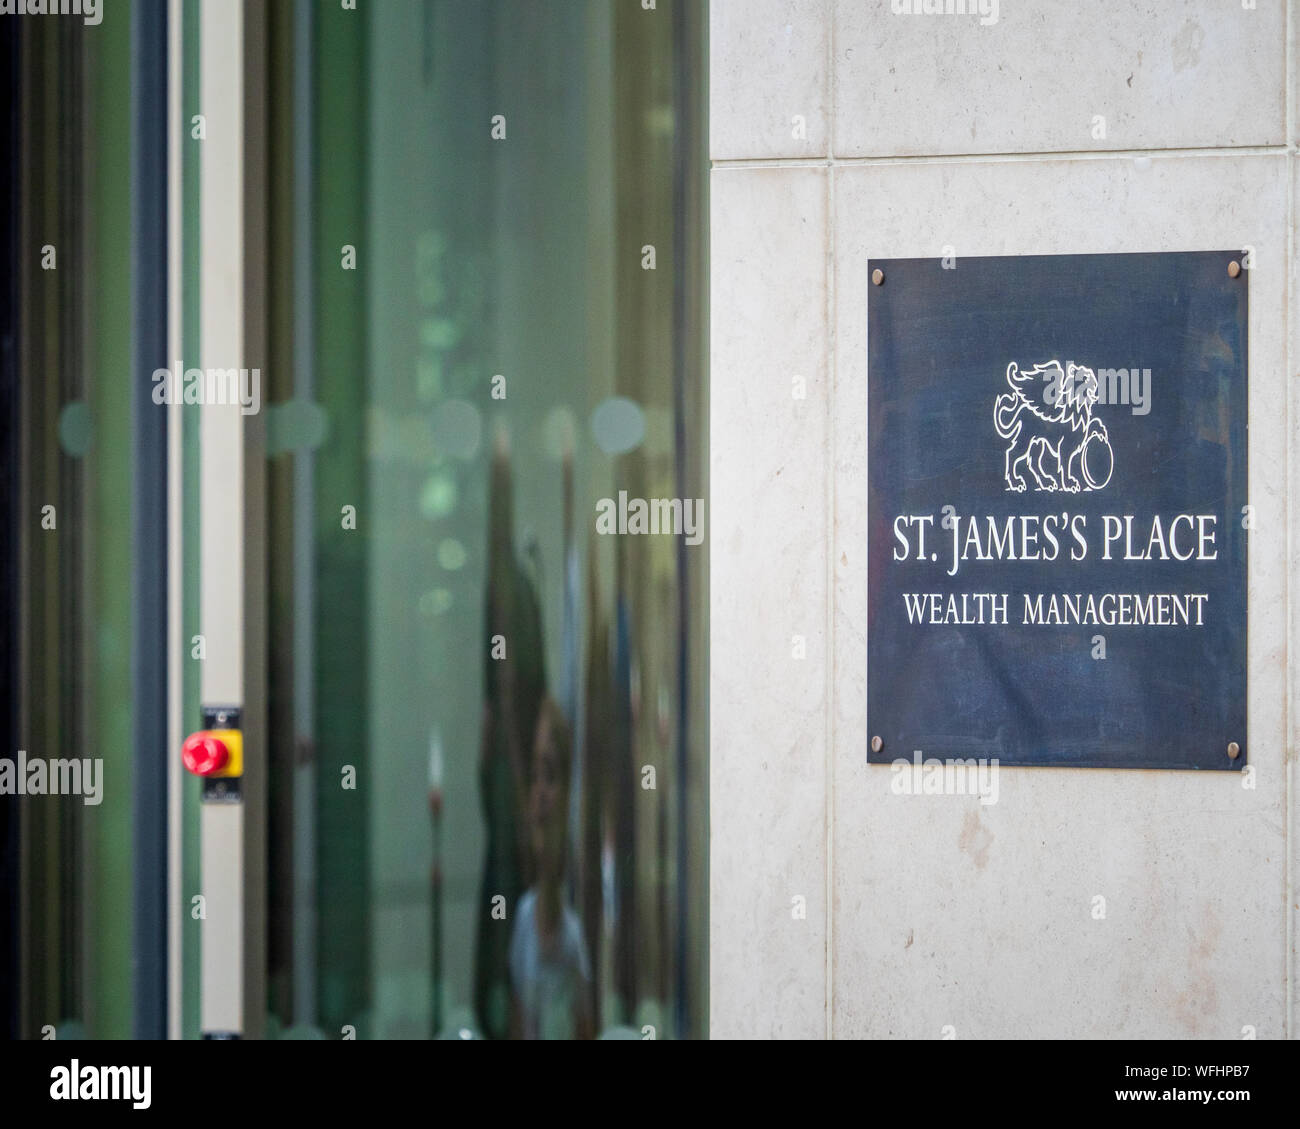 St James's Place Wealth Management company in the City of London Financial District. Stock Photo